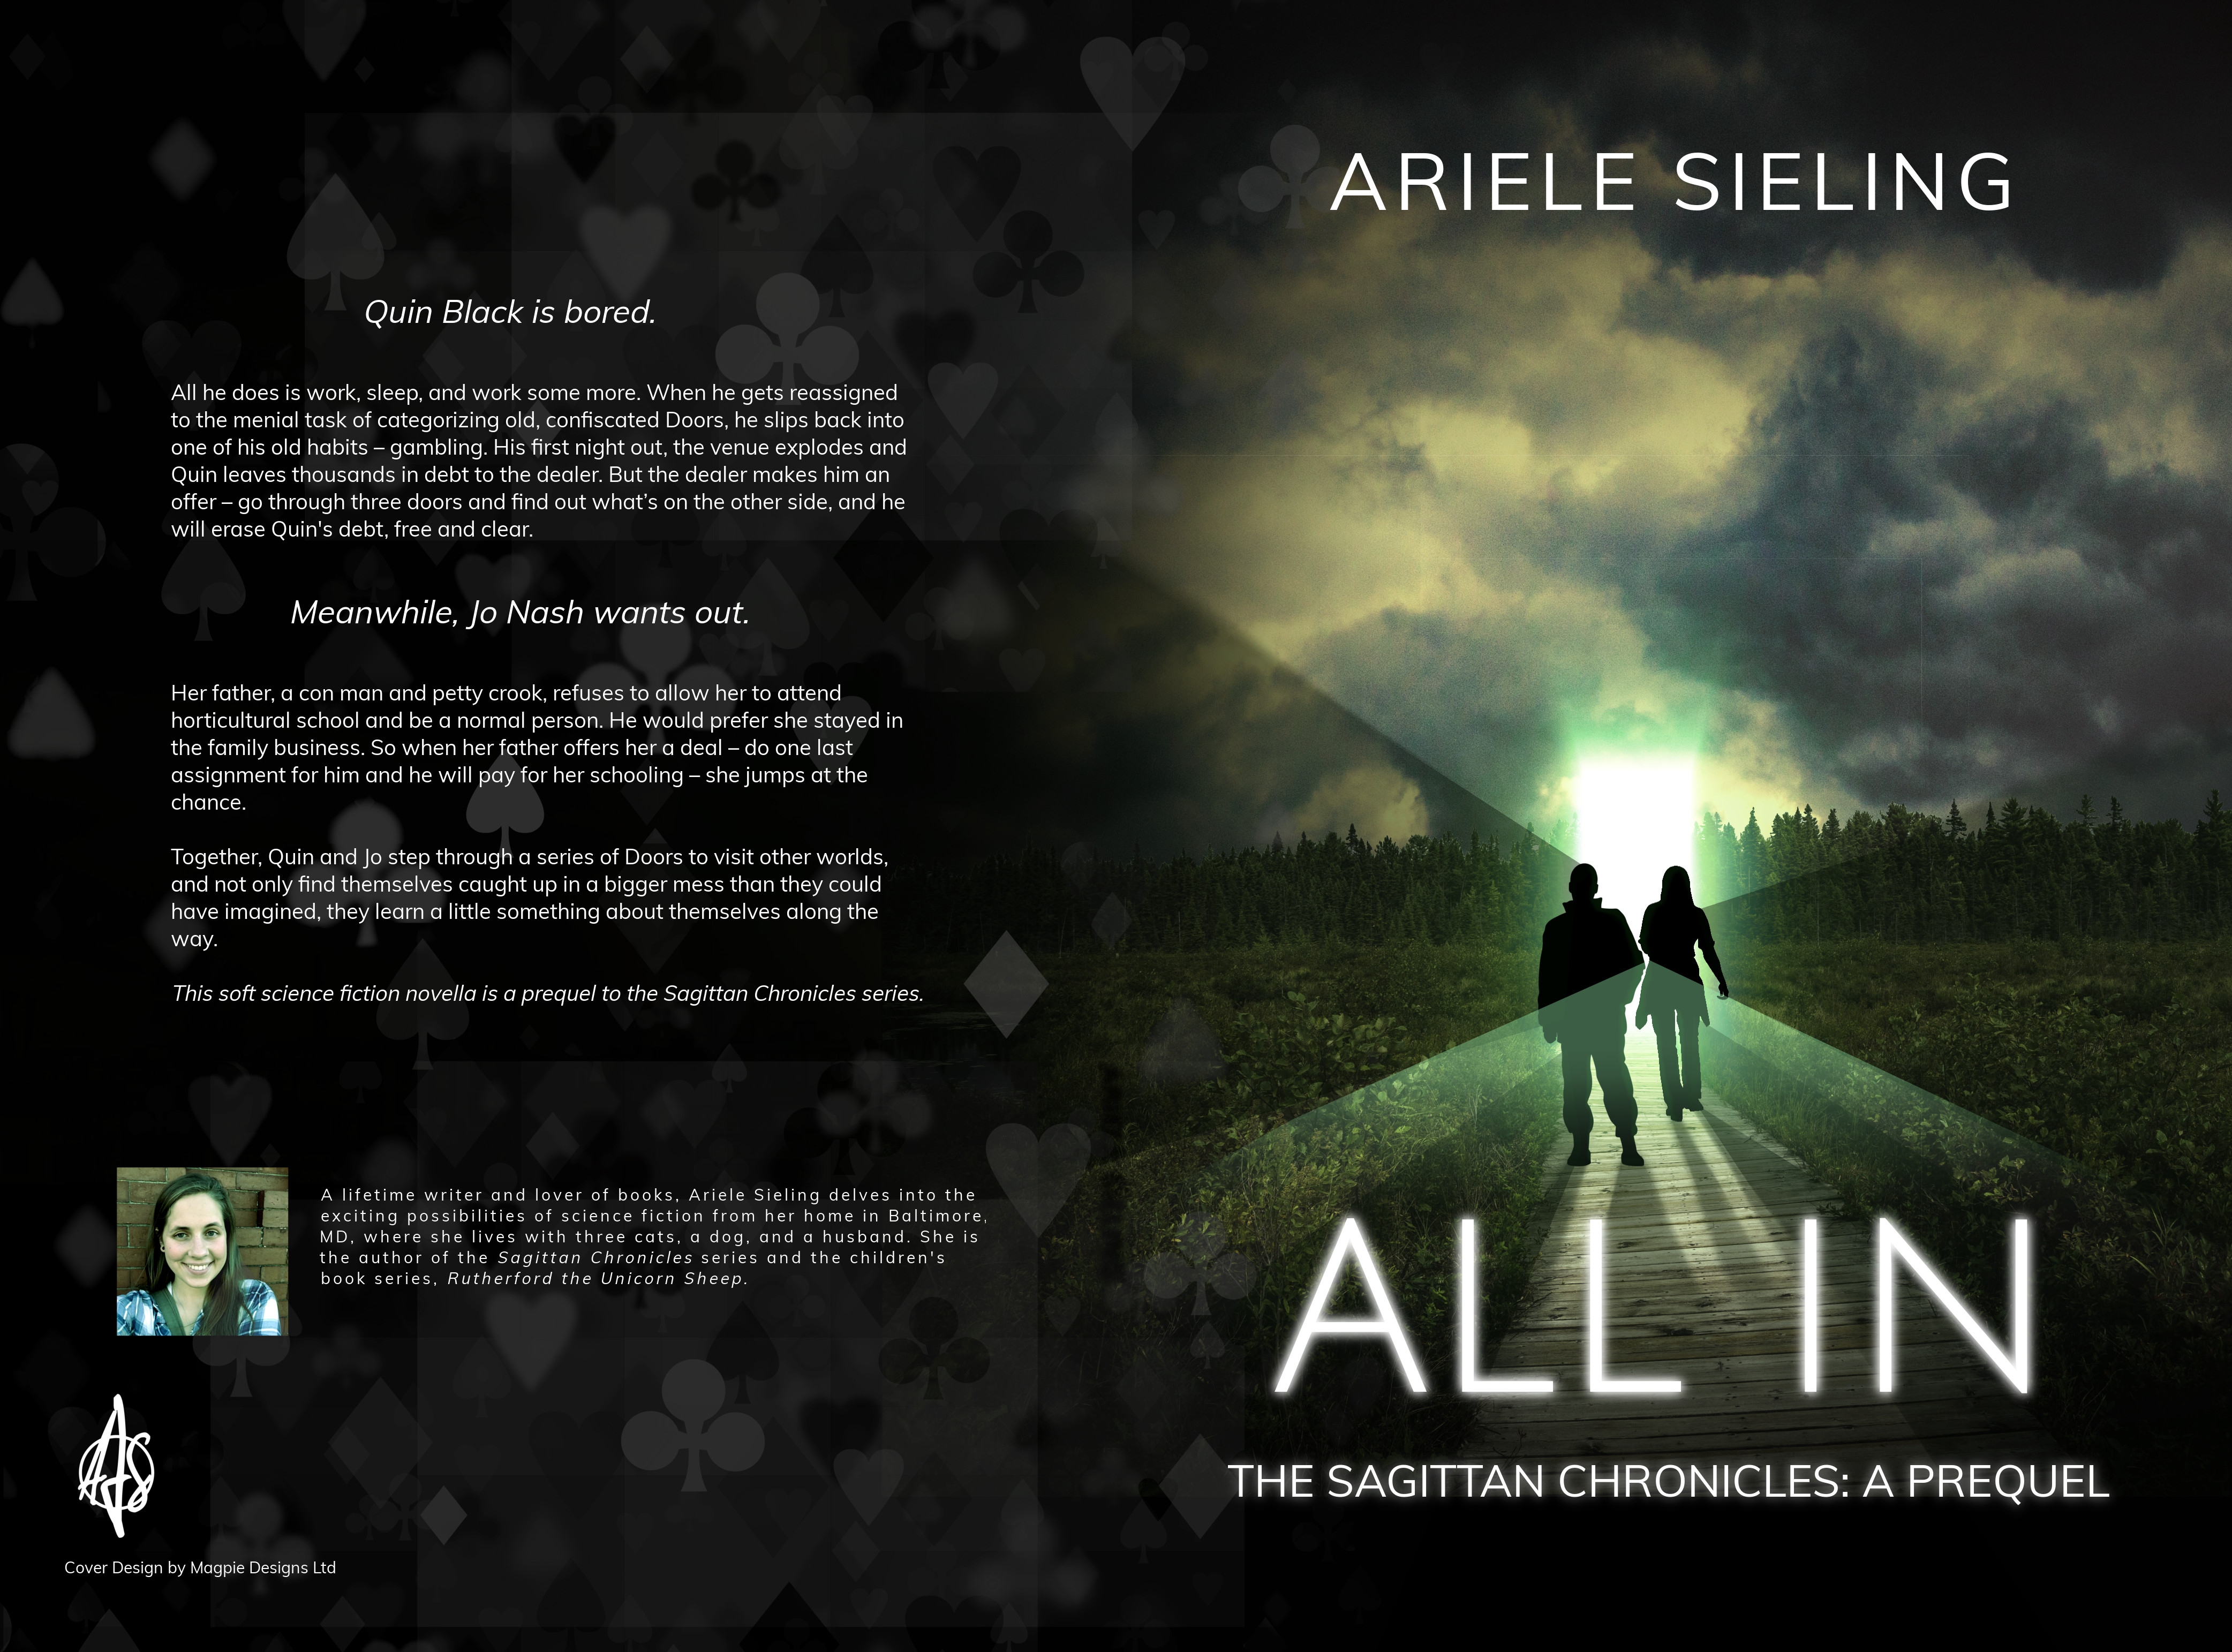 FREE: All In: A Prequel by Ariele Sieling